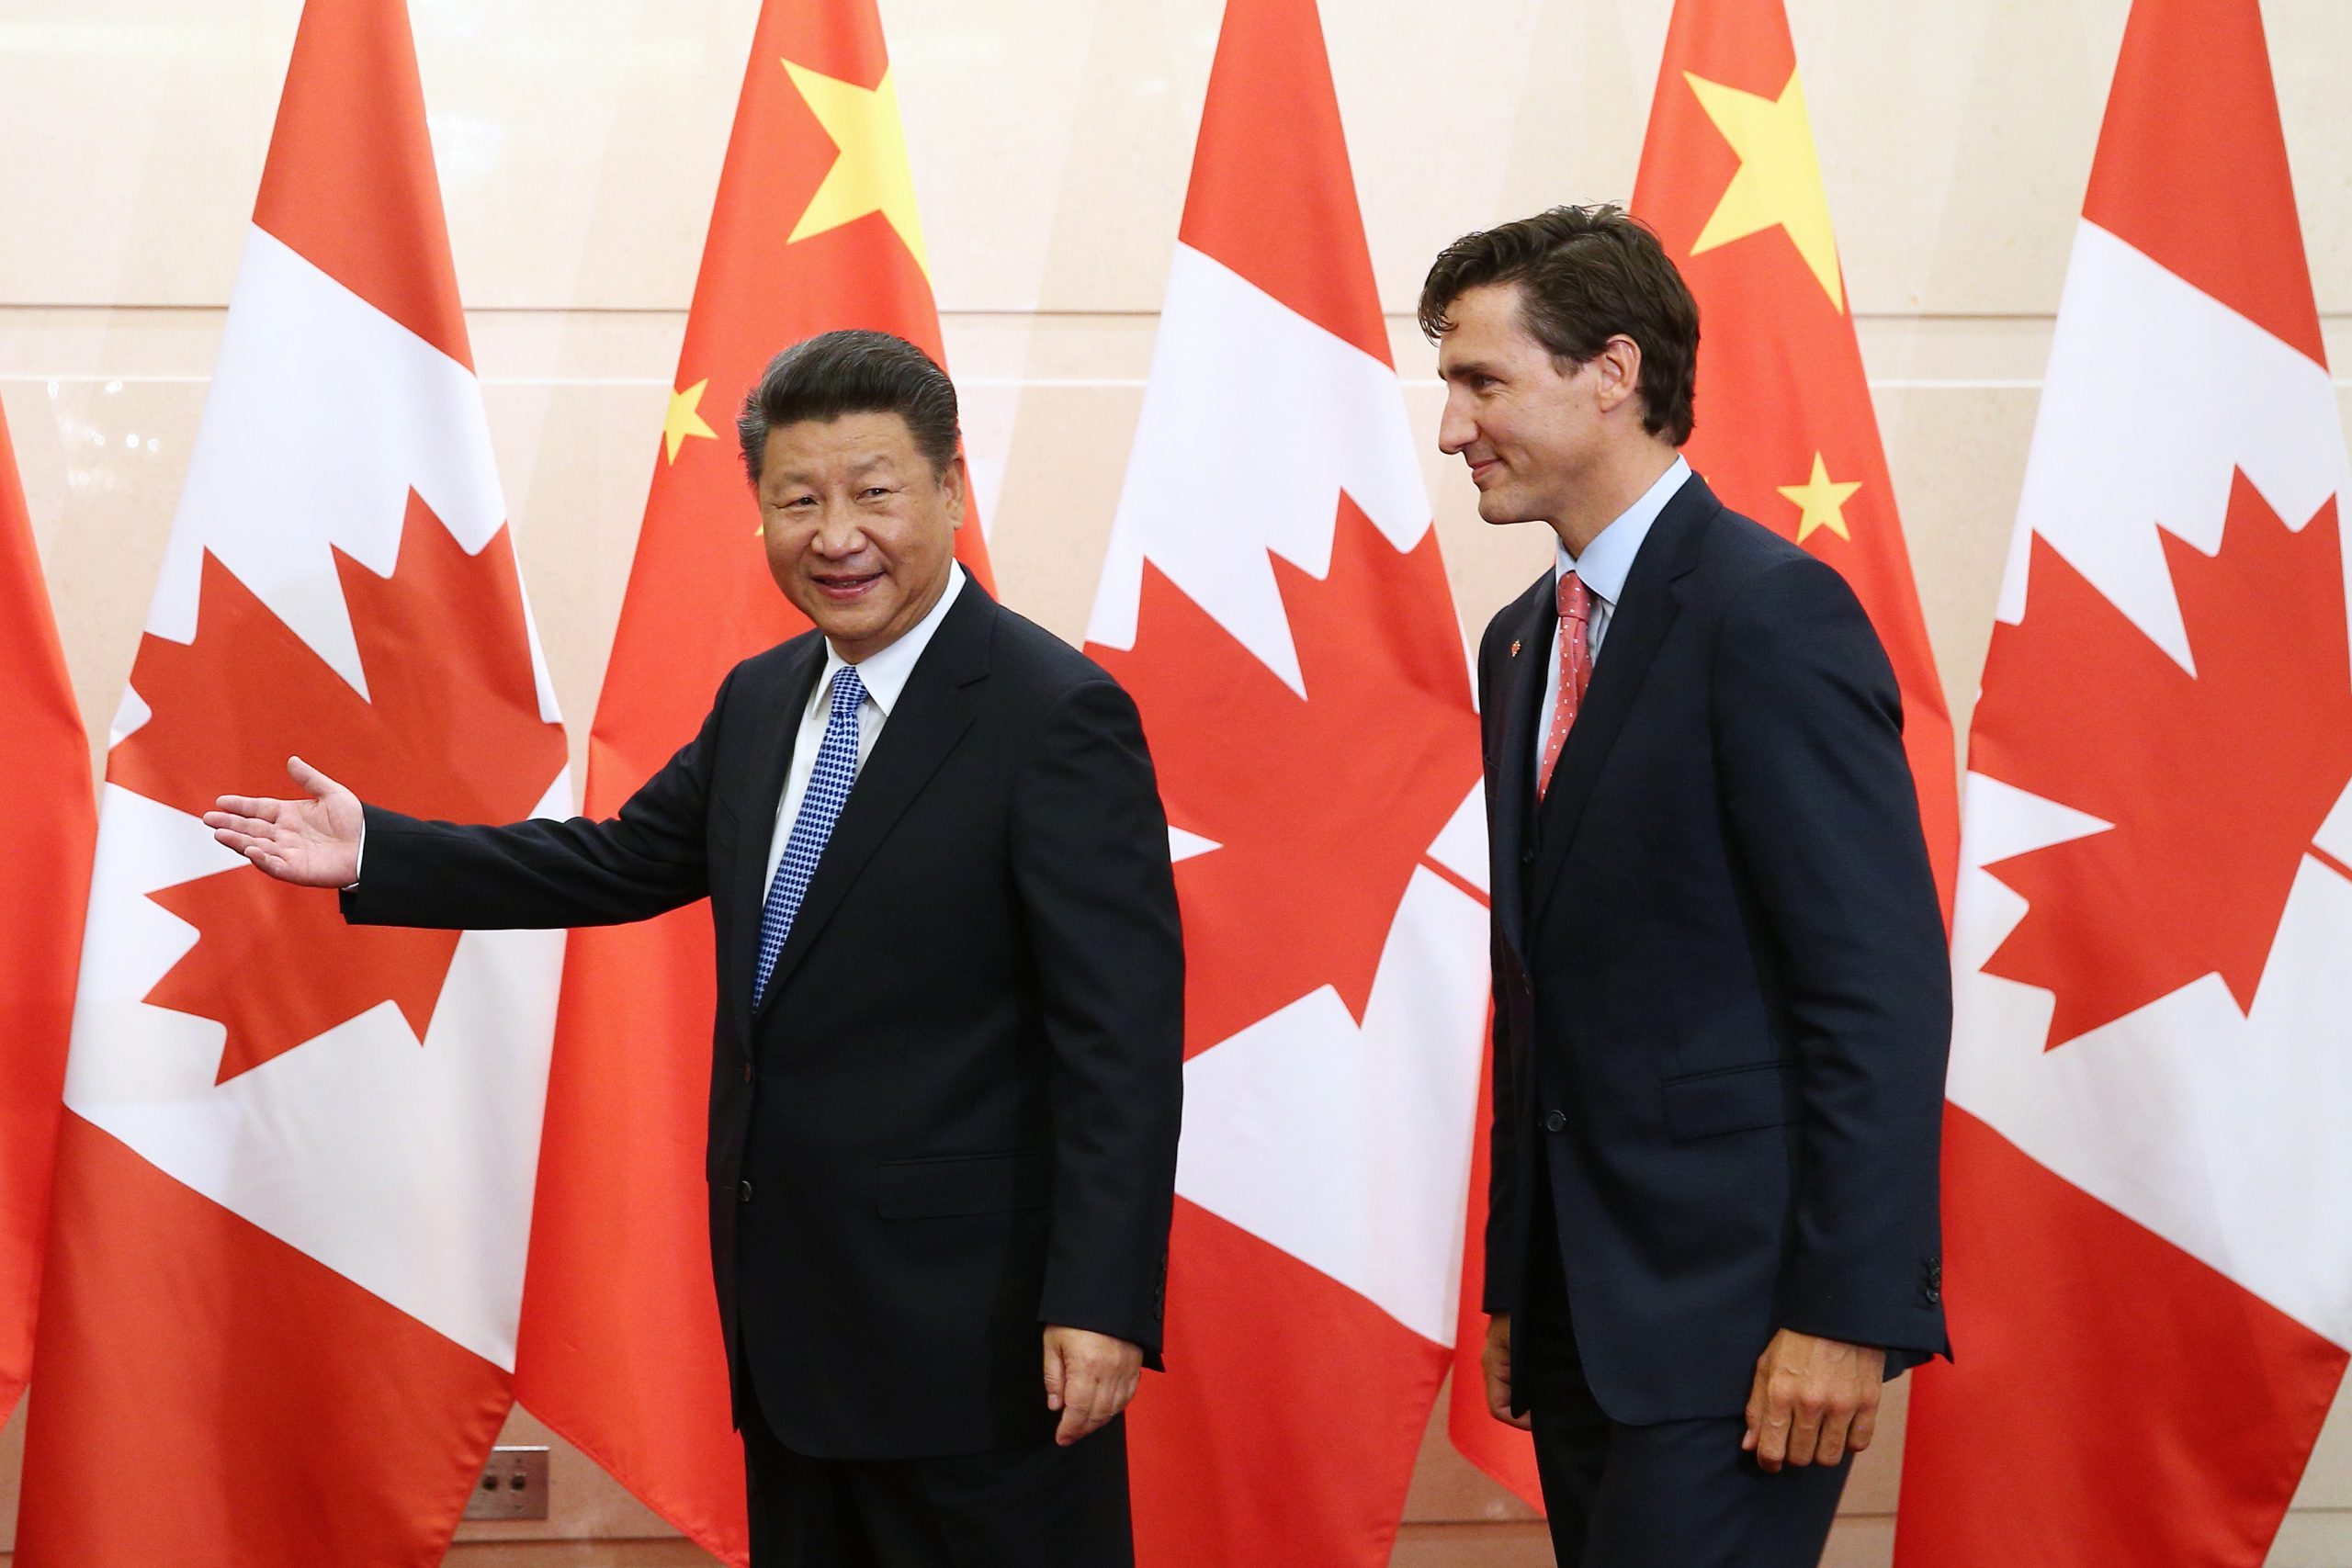 Canadian Prime Minister Justin Trudeau Visits China